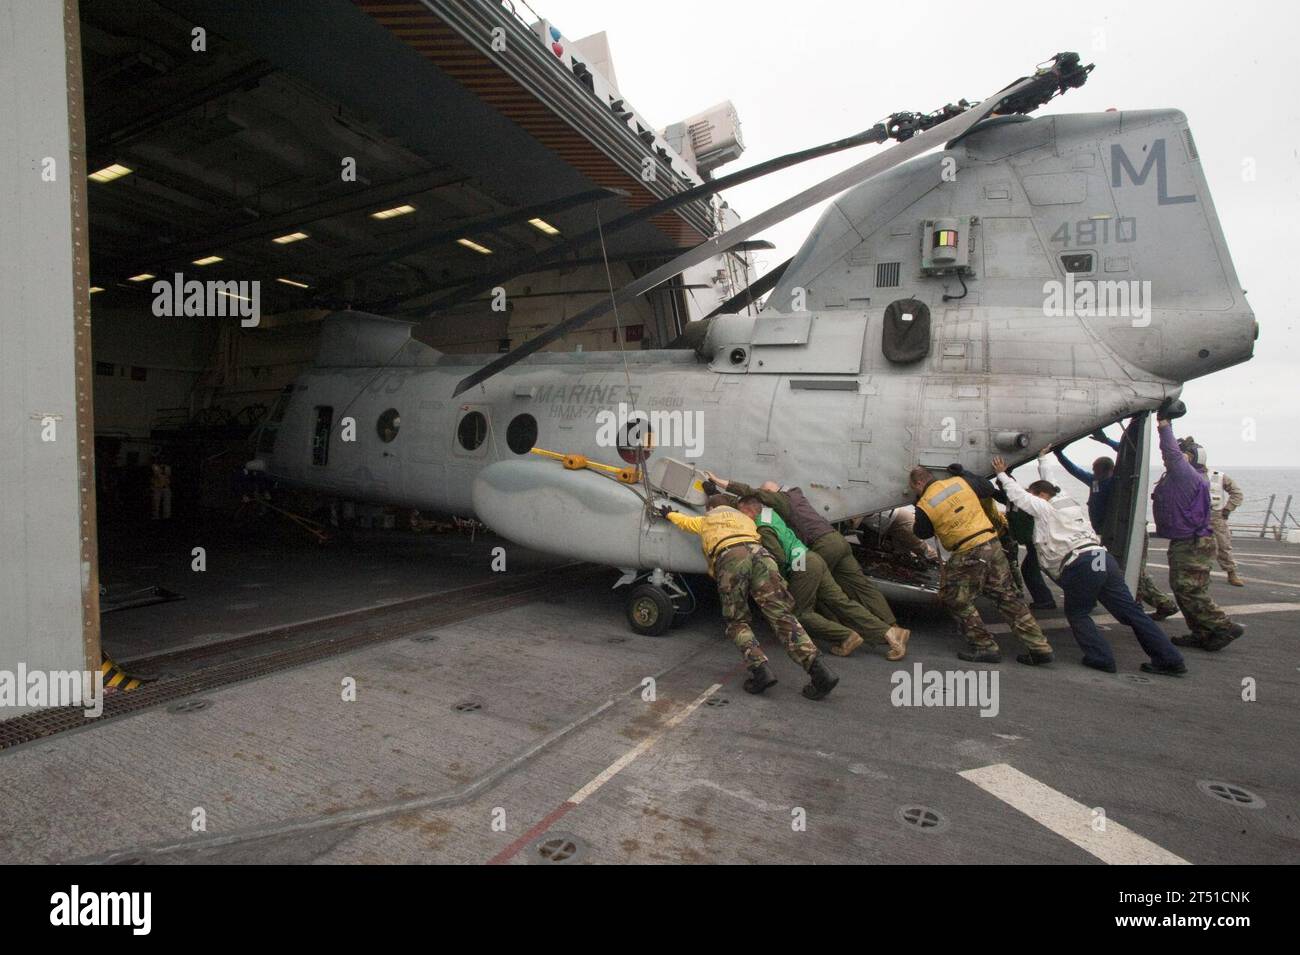 1007015319A-034 PACIFIC OCEAN (July 1, 2010) Crew members push a Marine CH-46 Sea Knight helicopter into the hanger bay of the amphibious transport dock ship USS New Orleans (LPD 18) during Southern Partnership Station 2010. New Orleans is participating in Southern Partnership Station, an annual deployment of U.S. military training teams to the U.S. Southern Command area of responsibility. Navy Stock Photo